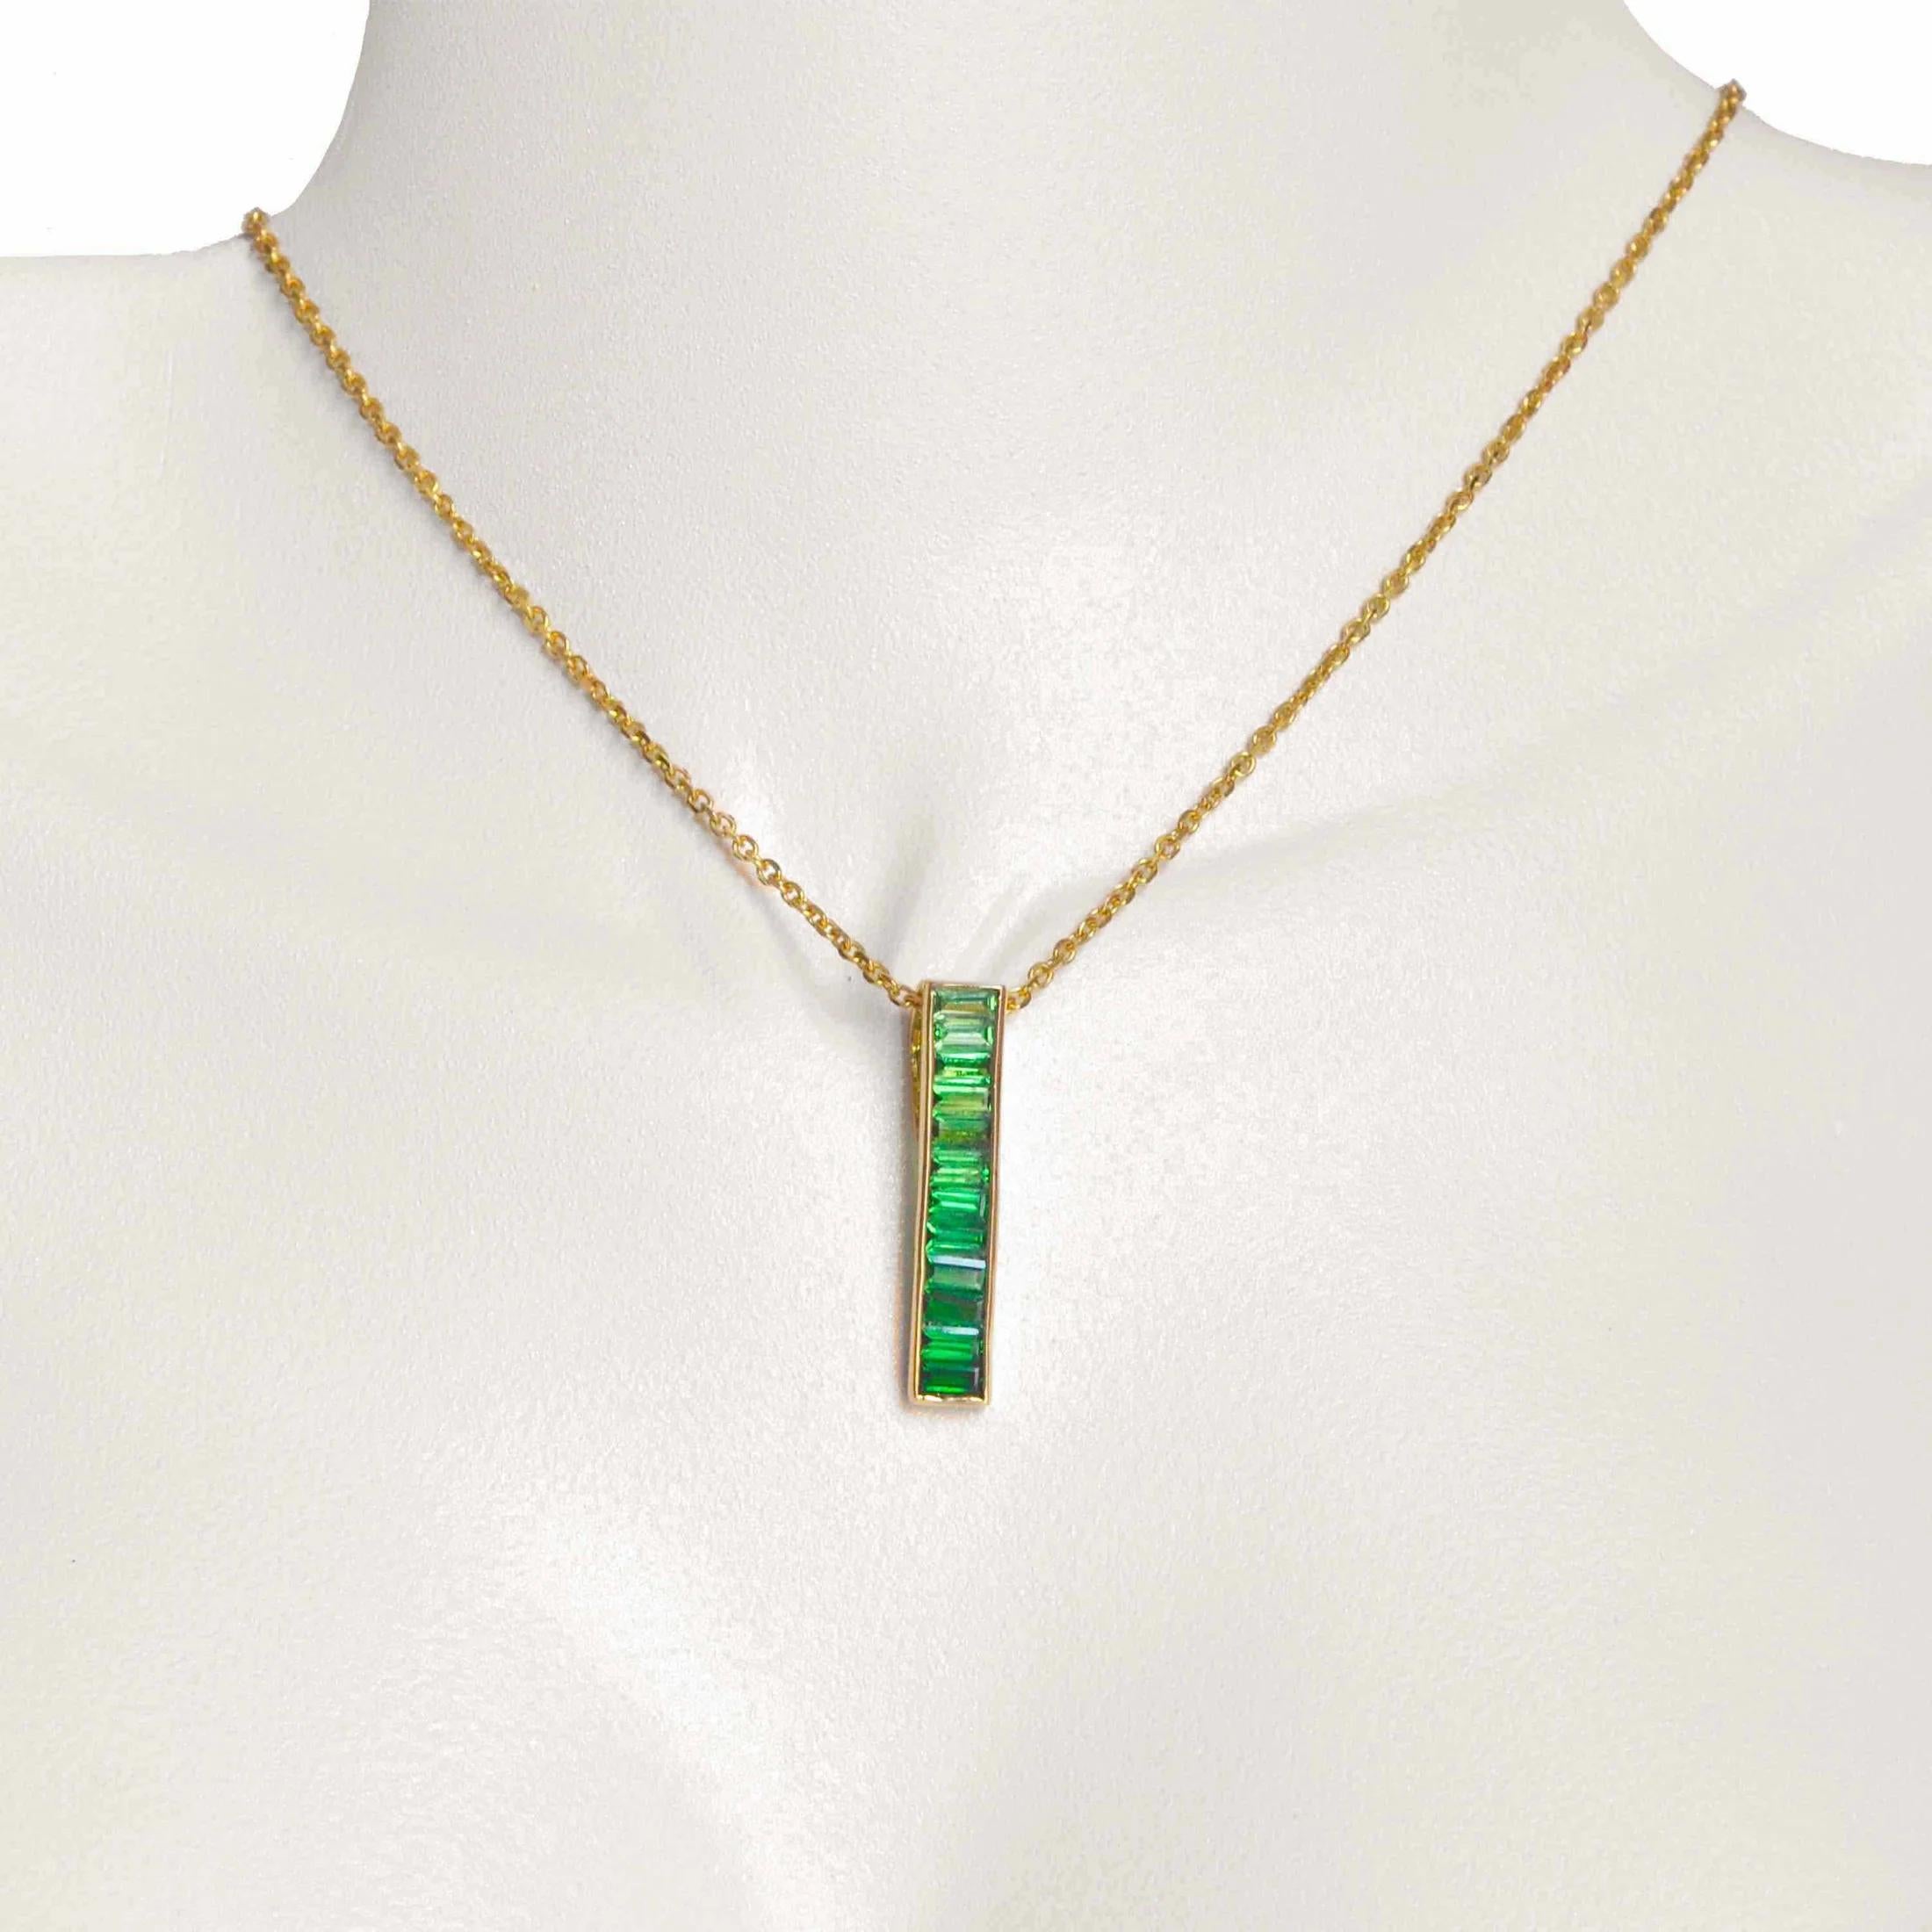 Adorn yourself with the exquisite allure of the 18K Gold Tsavorite Baguette Bar Pendant, a graceful fusion of nature's beauty and contemporary elegance. This pendant showcases a sleek bar design, meticulously embellished with vibrant green tsavorite